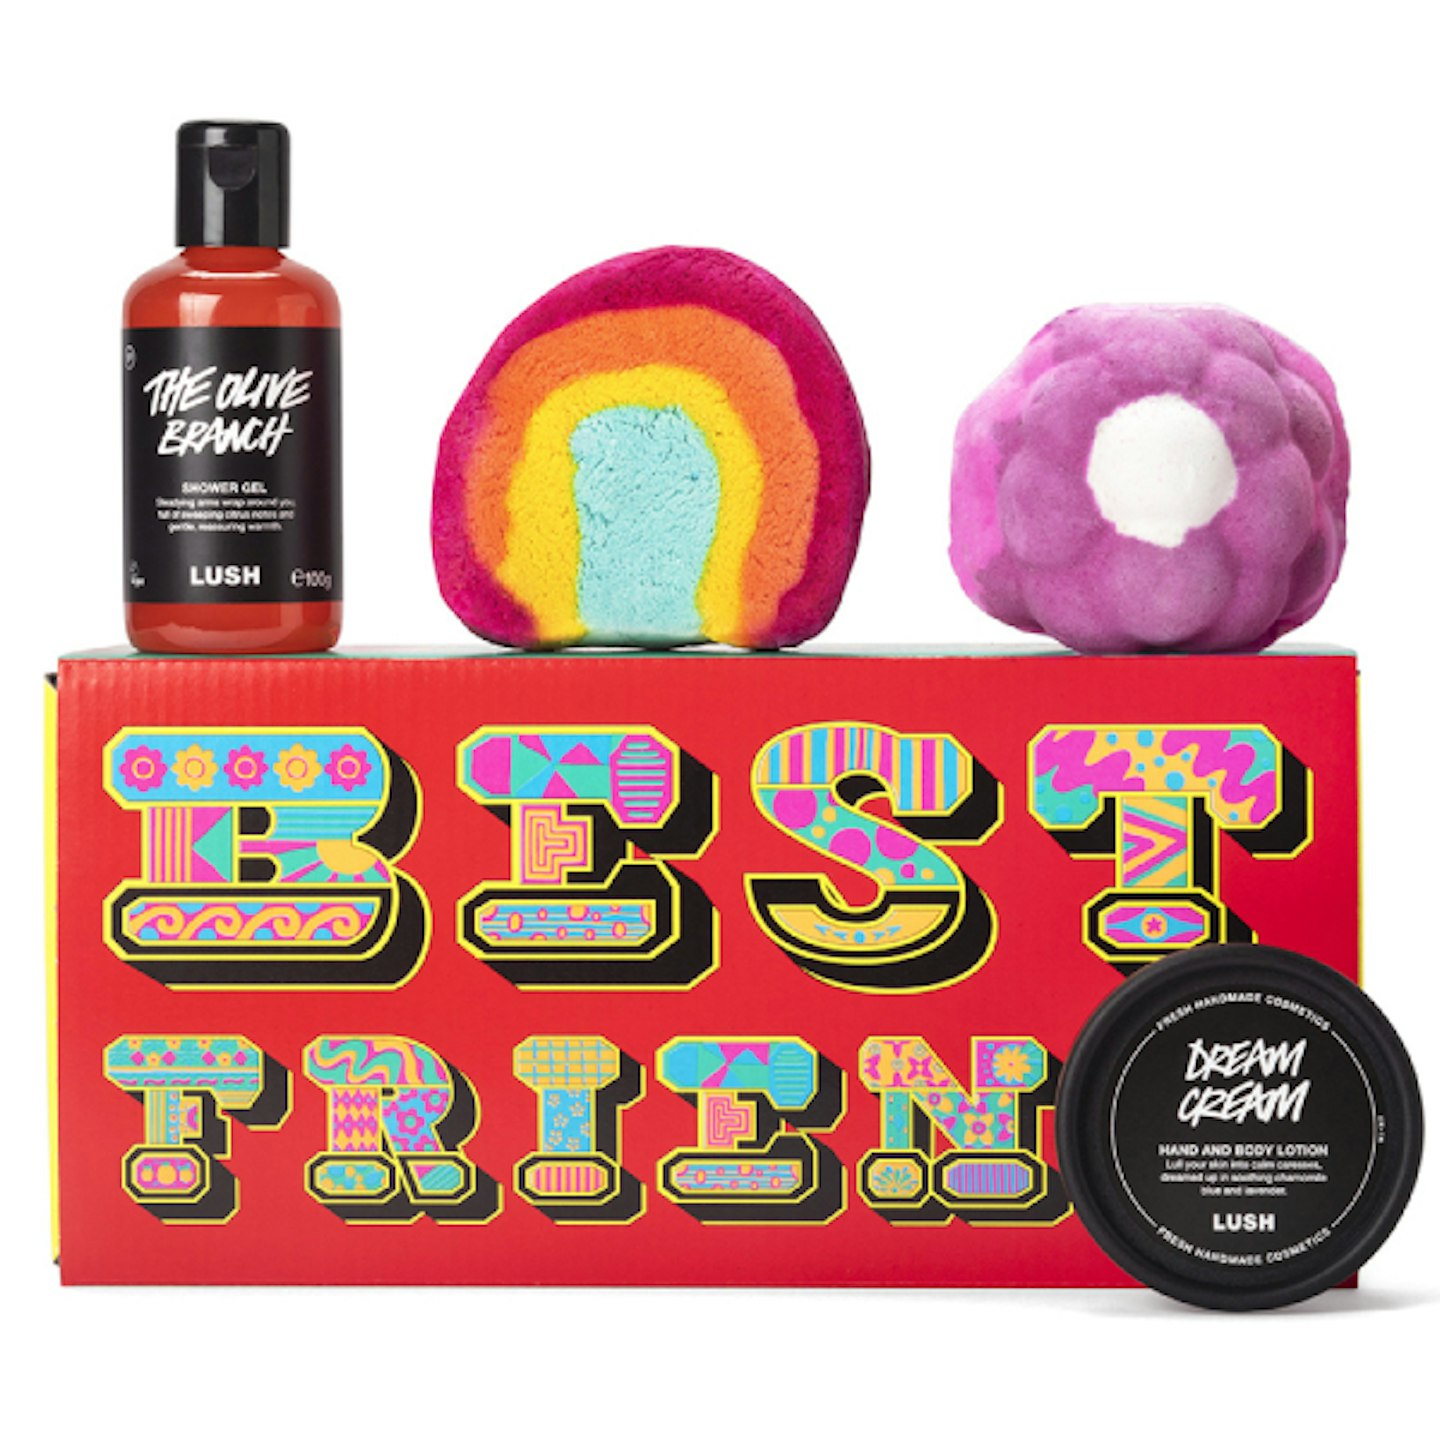 Lush gift box with bath bomb and body gel